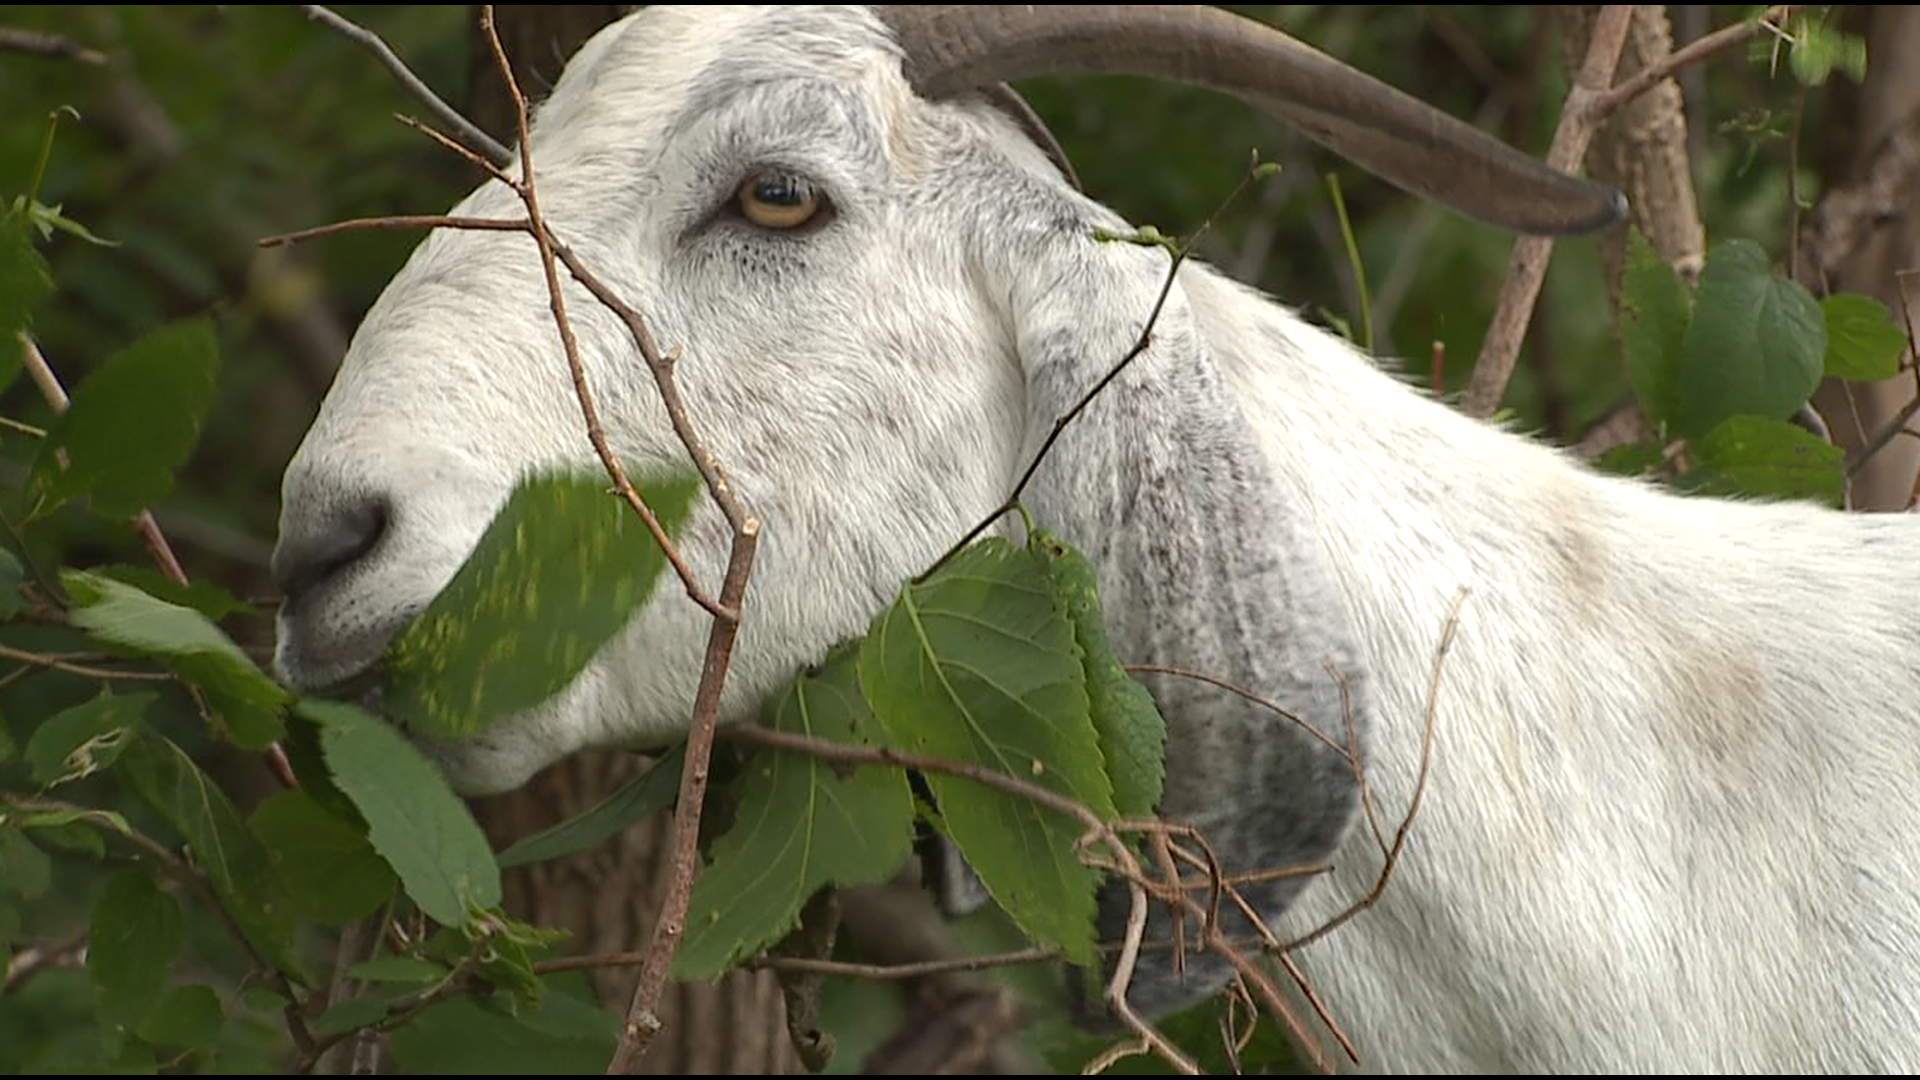 Four goats are on loan from a Davenport farm until mid-September to eat the undergrowth on a steep hillside on the property.